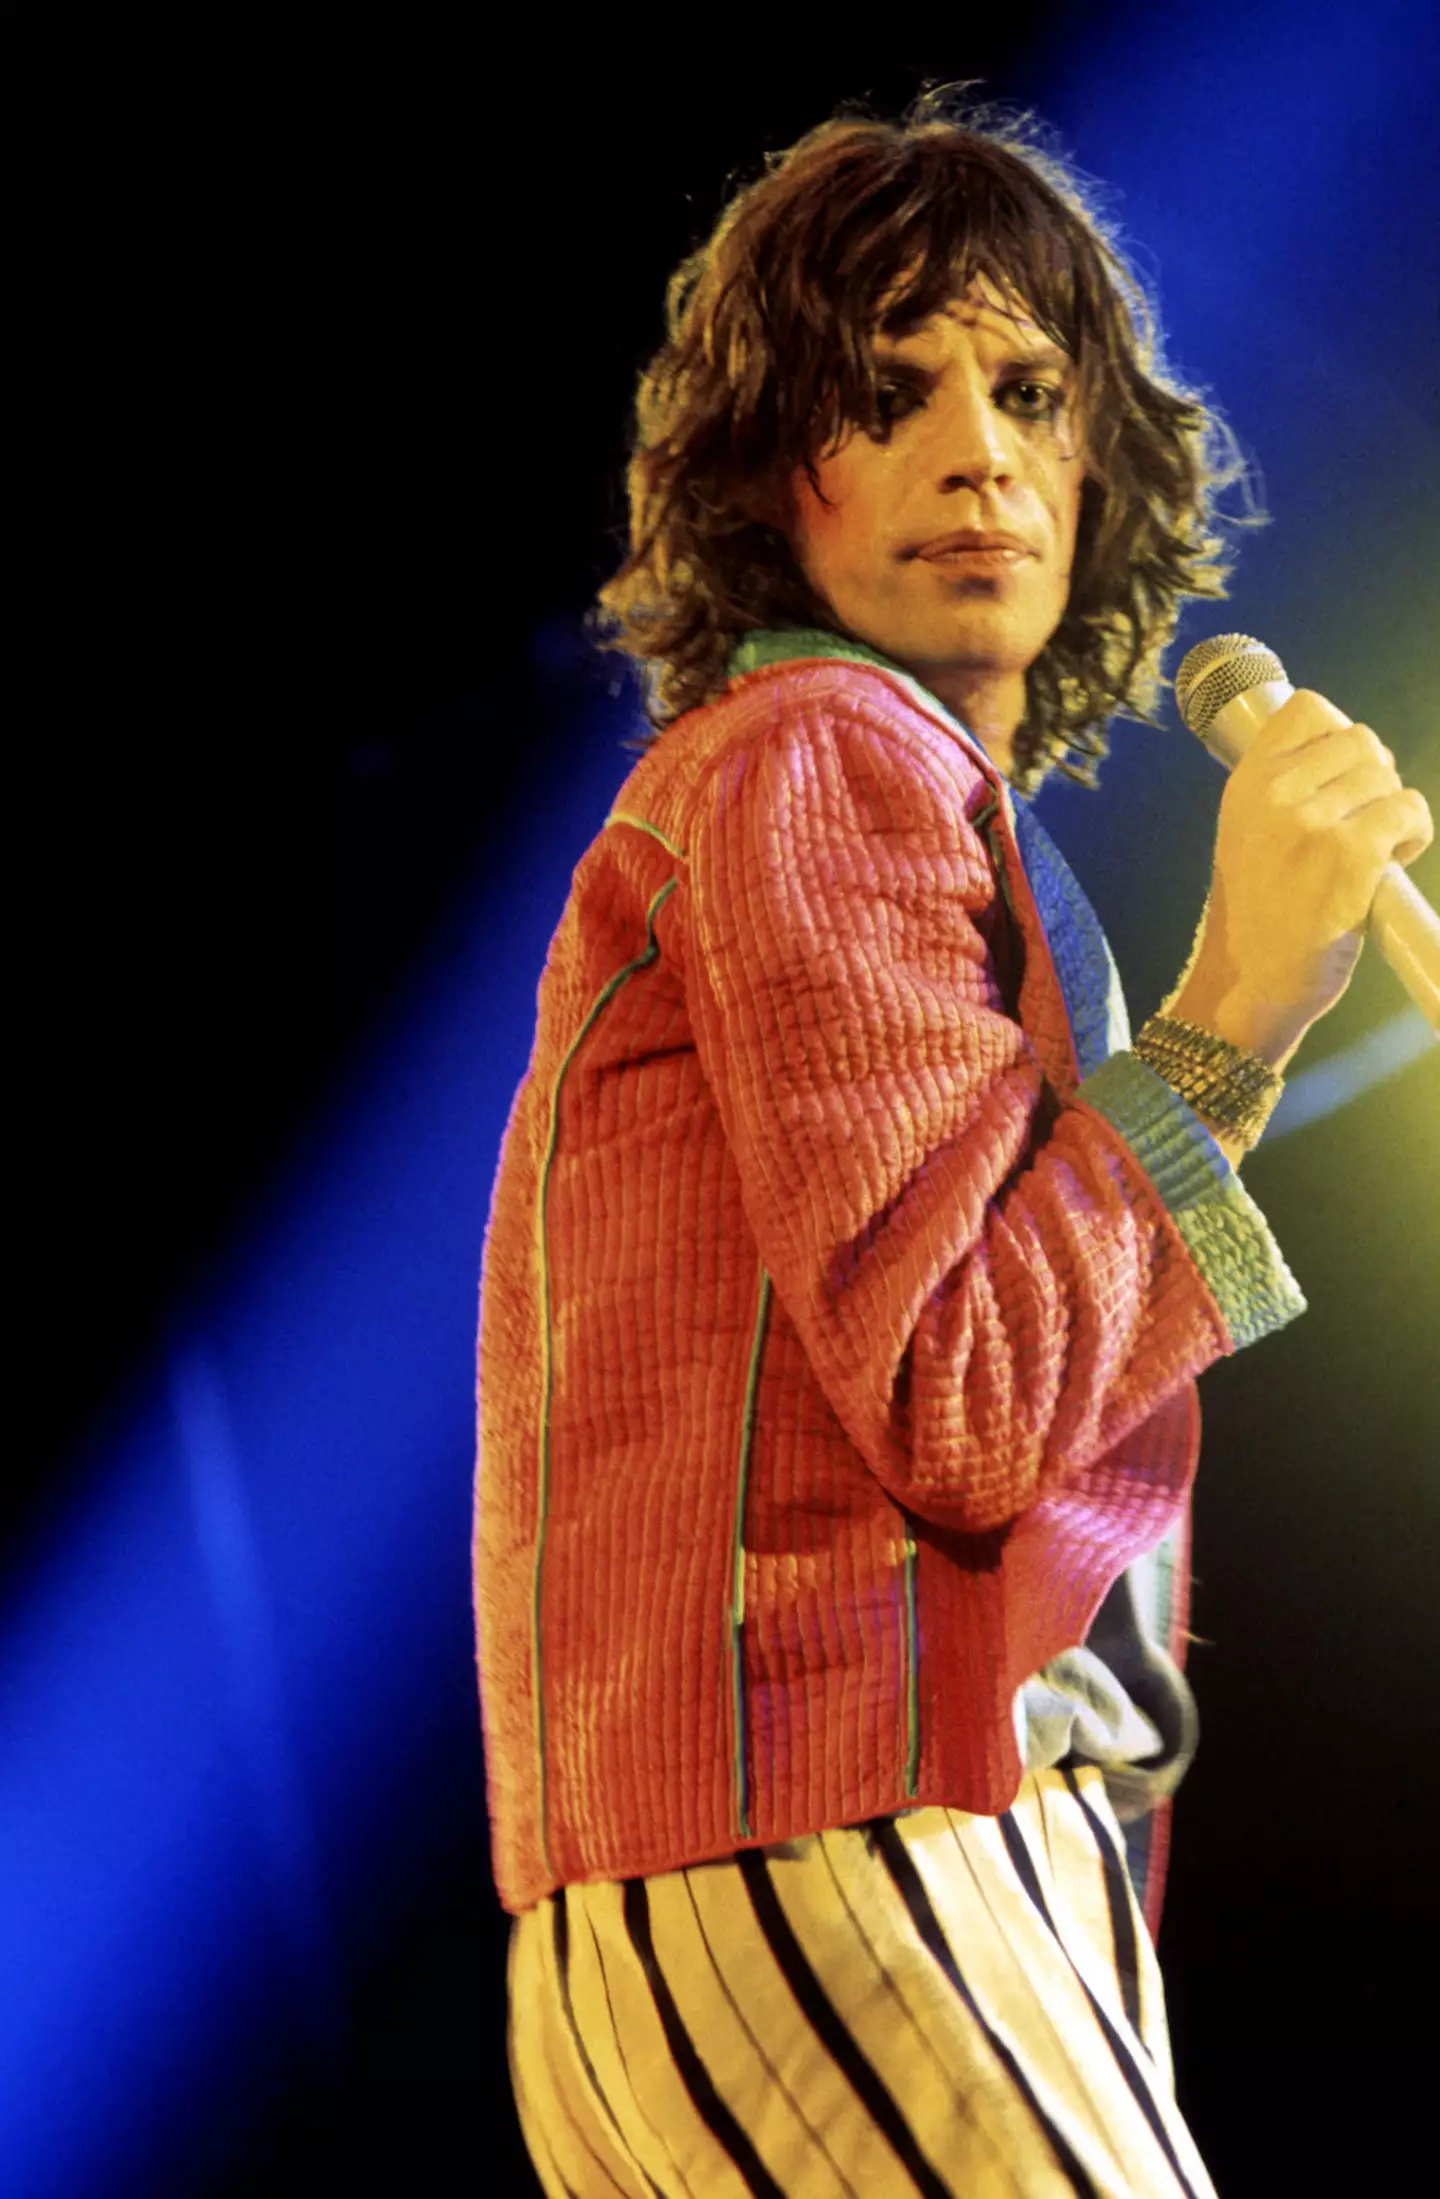 Mick Jagger says he was 'much more androgynous' than Harry Styles.